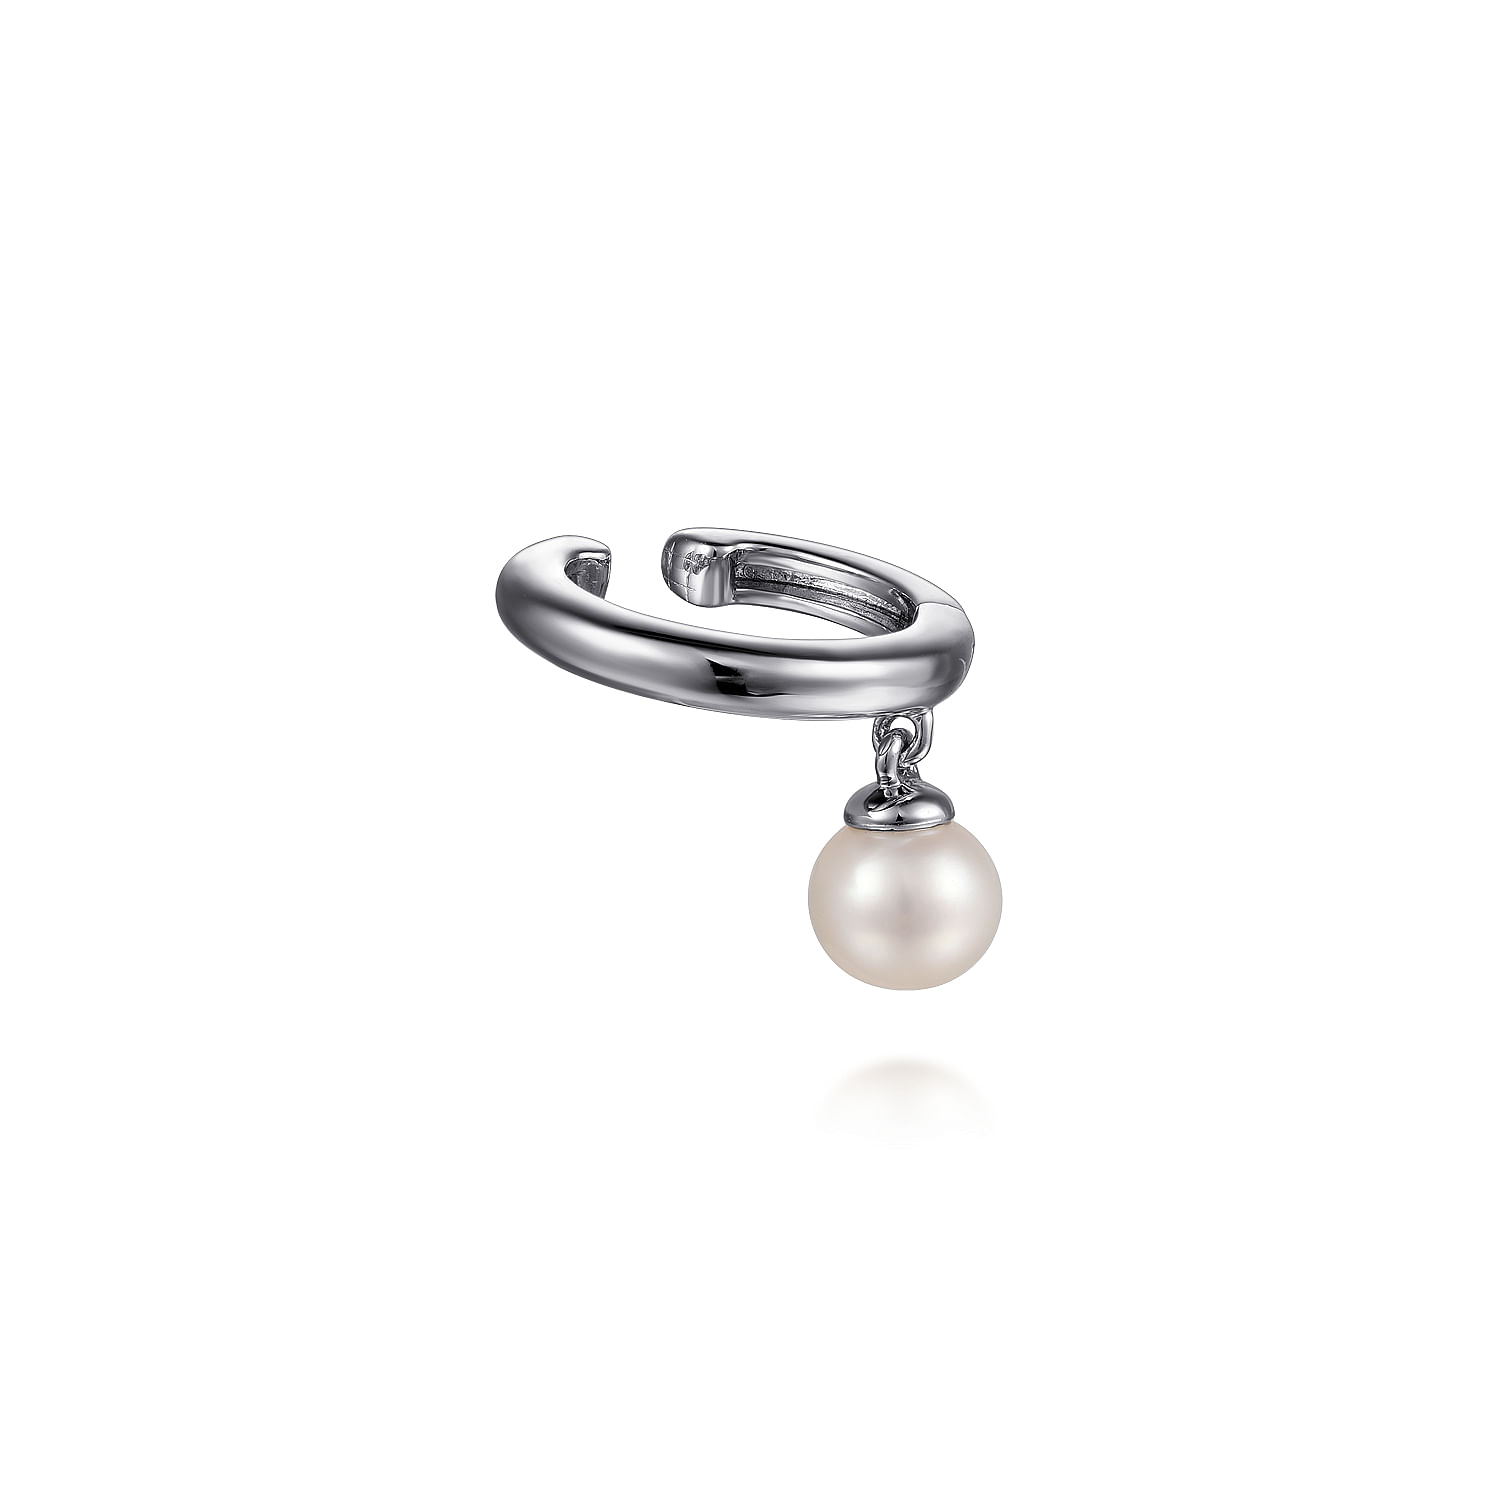 14K White Gold Ear Cuff With 5mm Hanging Pearl